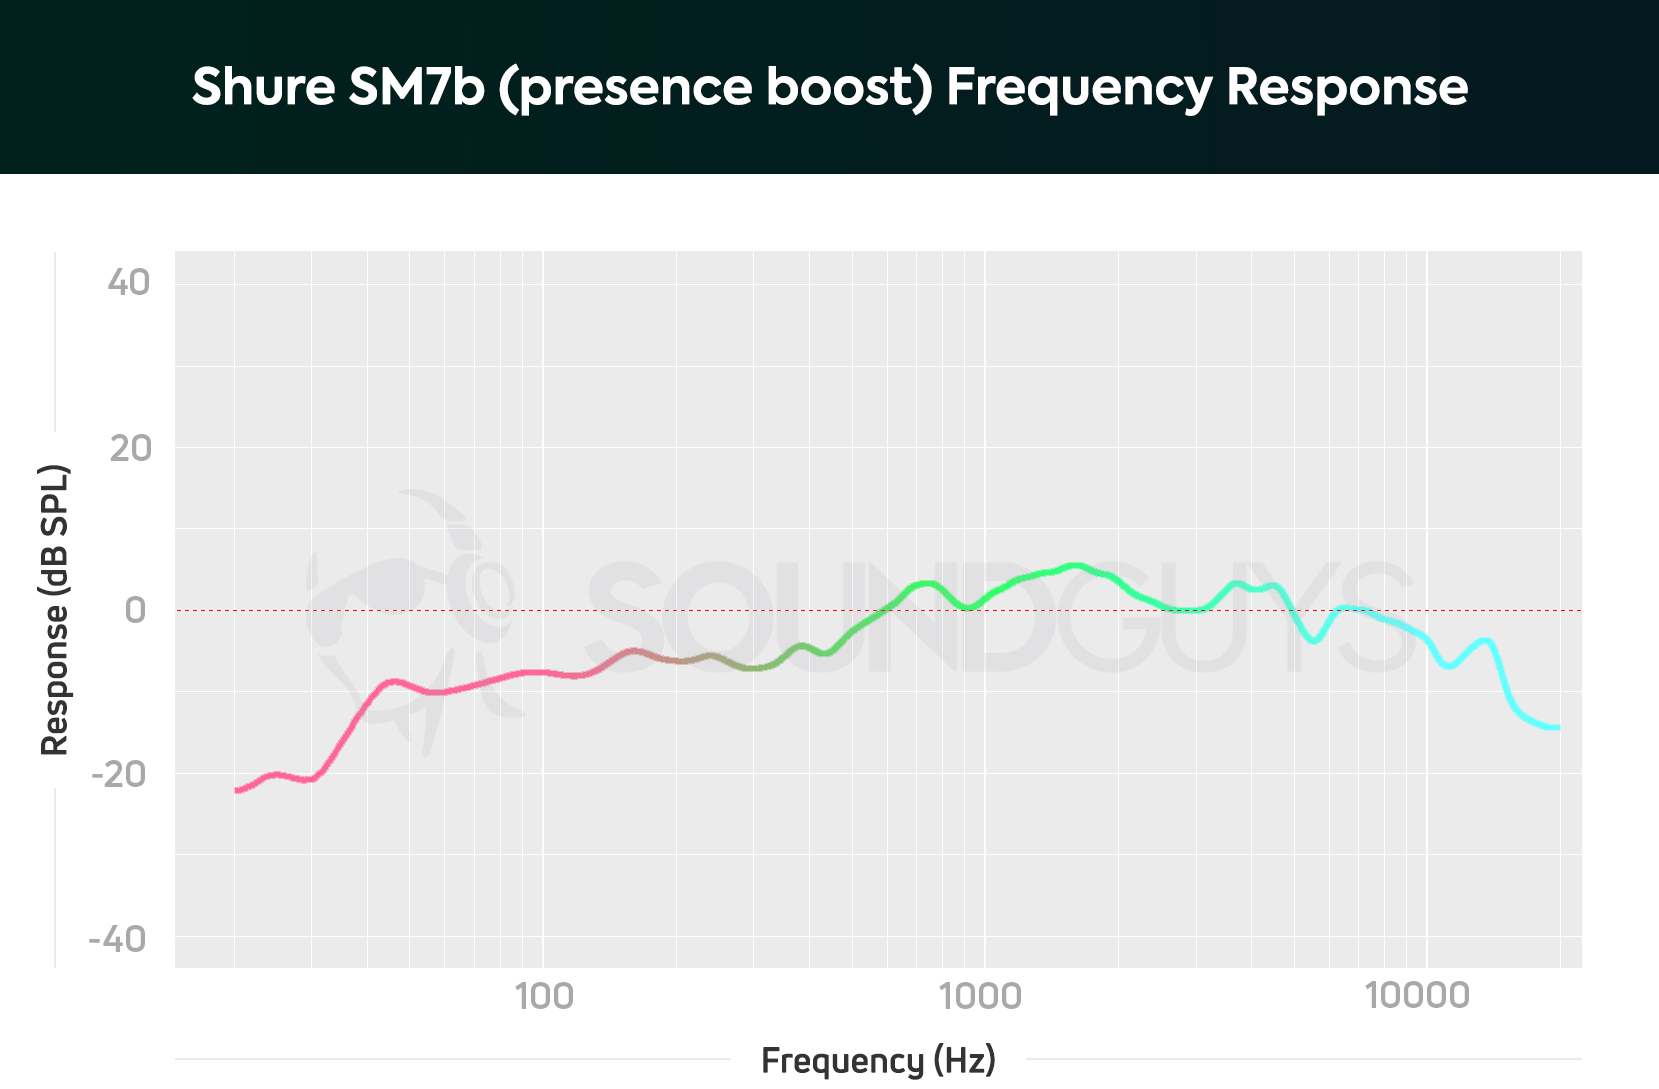 A chart depicting the Shure SM7B dynamic microphone frequency response with presence boost mode on.